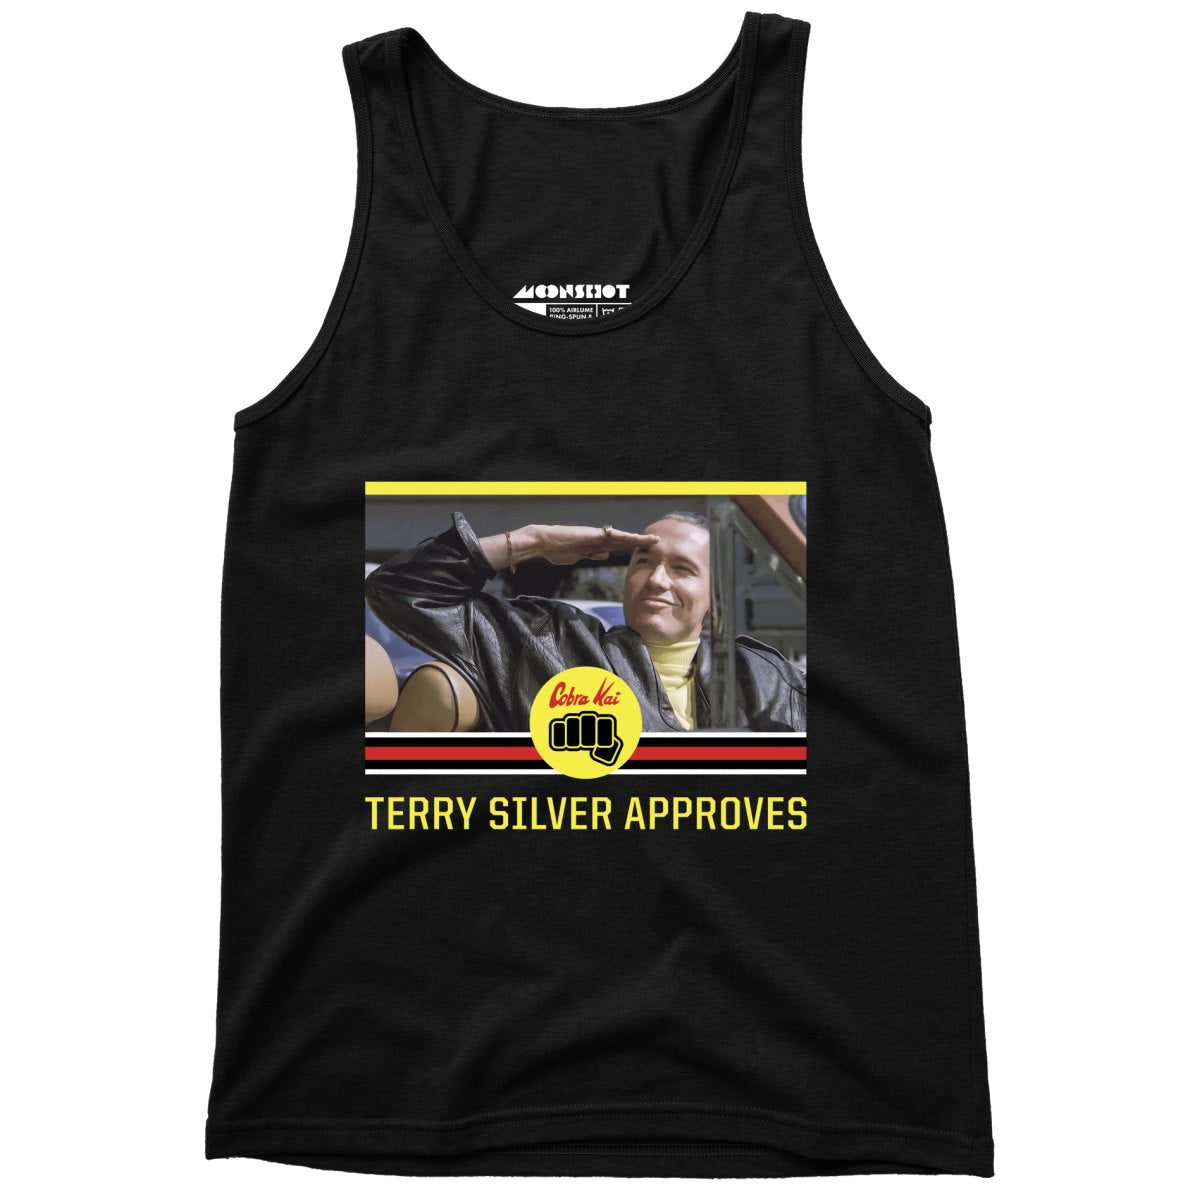 Terry Silver Approves - Unisex Tank Top